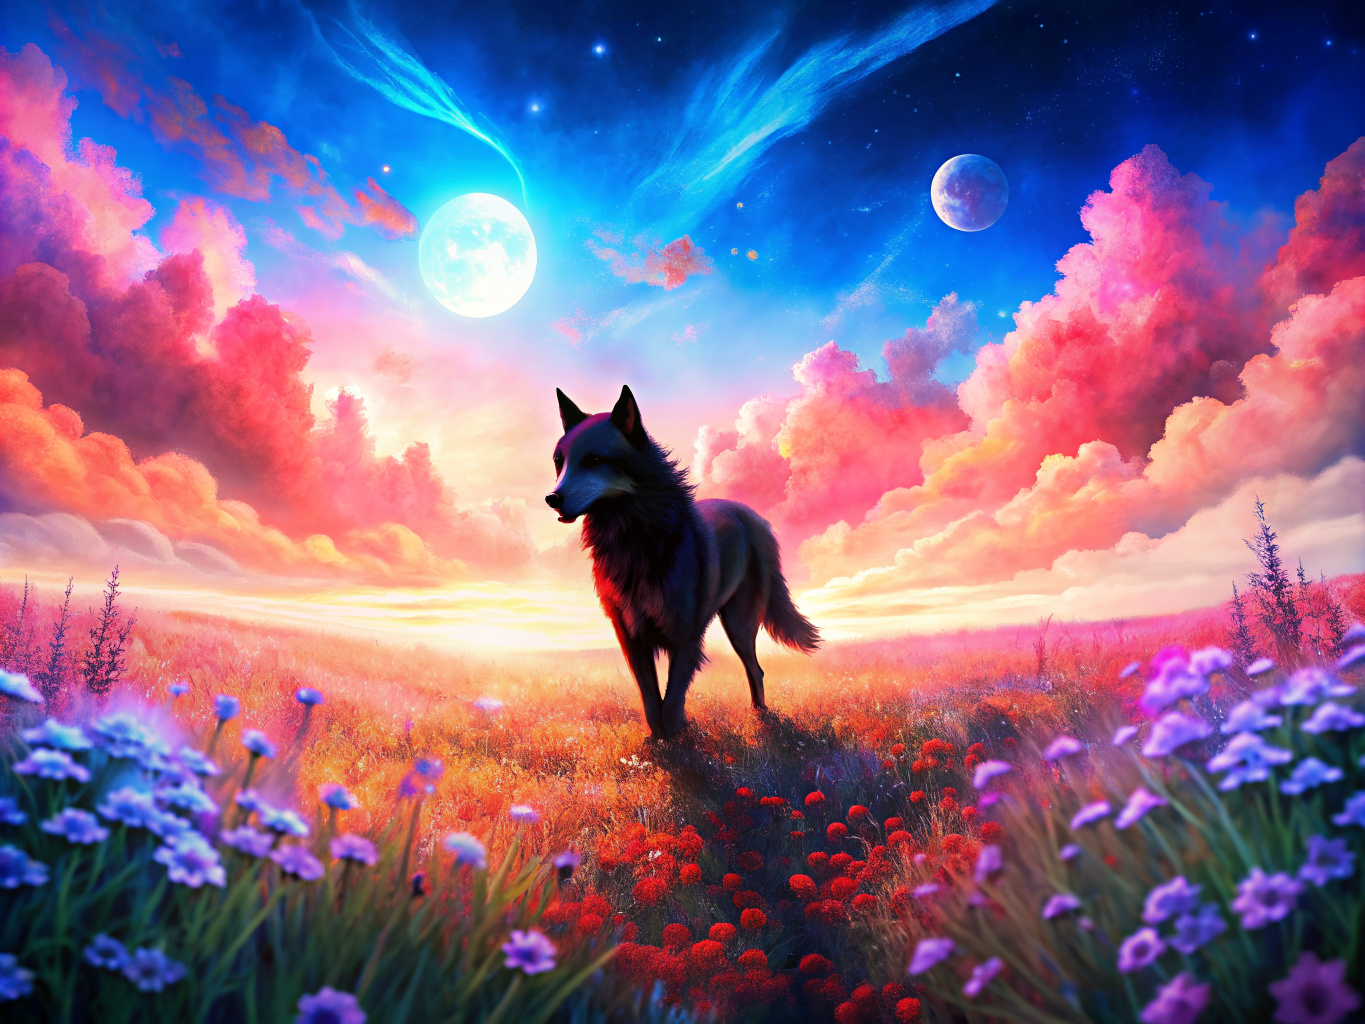 A black wolf walks through endless fields of flowers. and the sky is blue with pink clouds